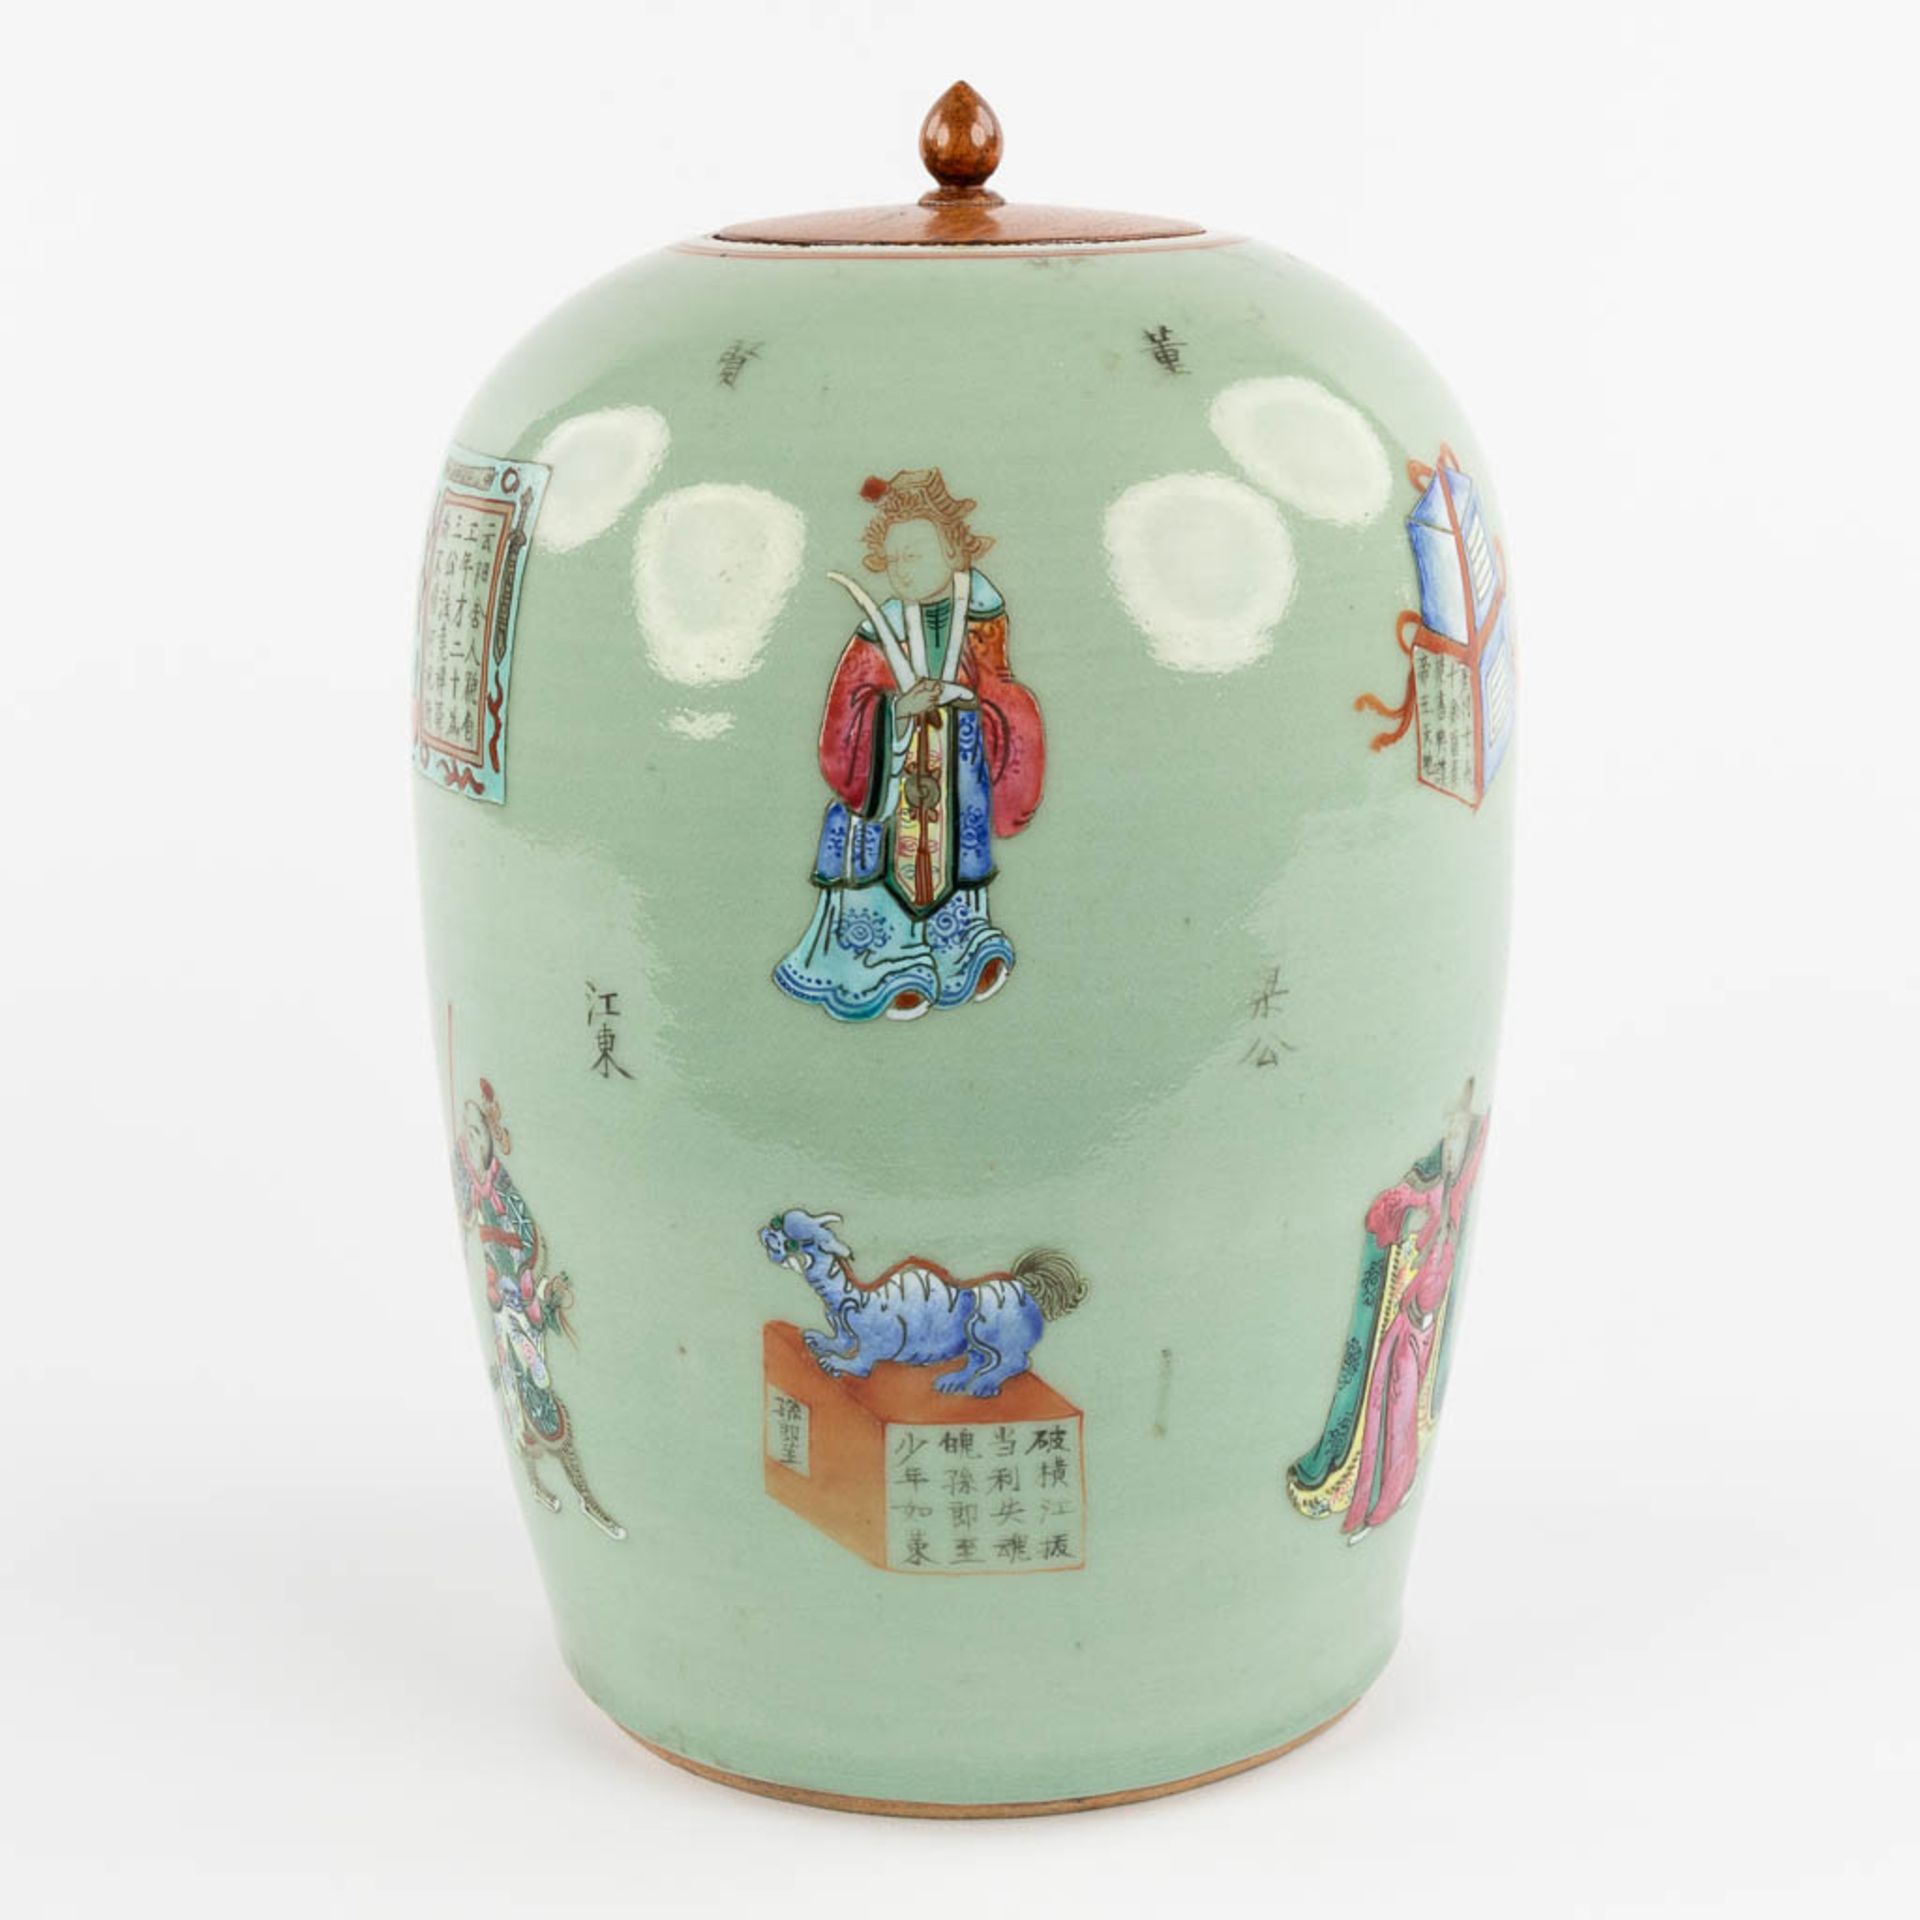 A Chinese Celadon ground ginger jar, decorated with warriors, calligraphy, and mythological figurine - Image 4 of 16